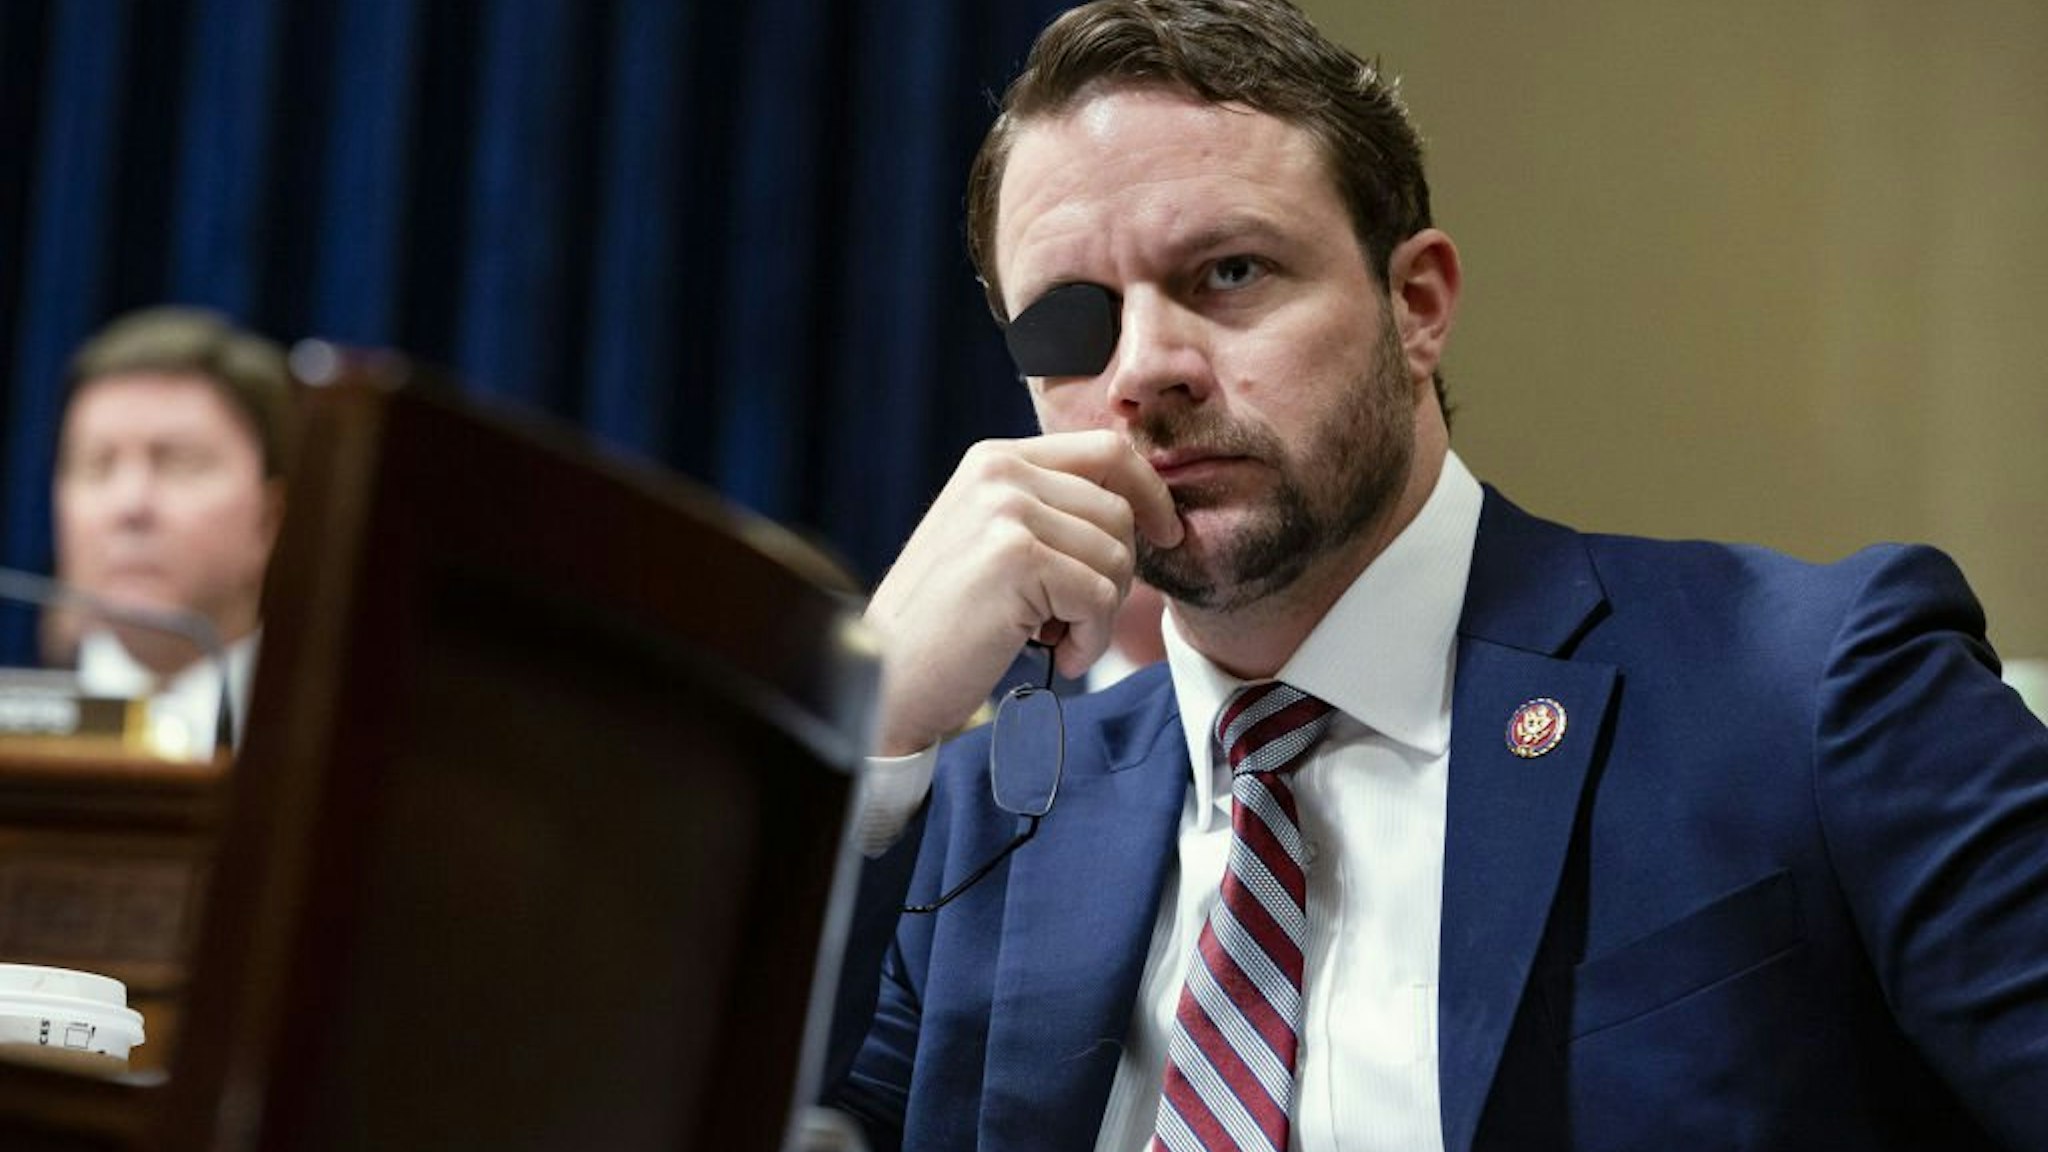 Representative Dan Crenshaw, a Republican from Texas, listens during a House Homeland Security Committee hearing in Washington, D.C., U.S., on Wednesday, June 26, 2019.